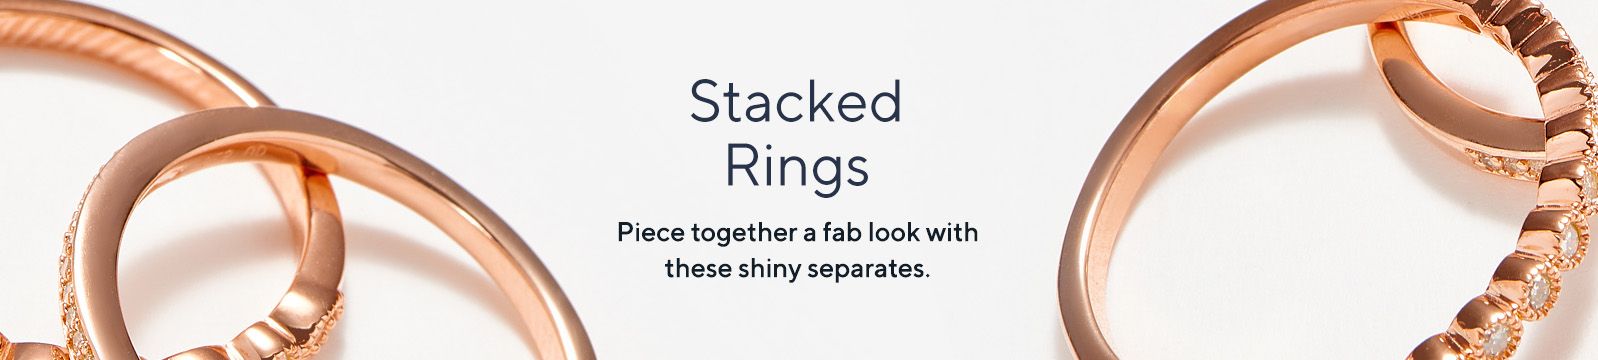 Stacked Rings Piece together a fab look with these shiny separates.